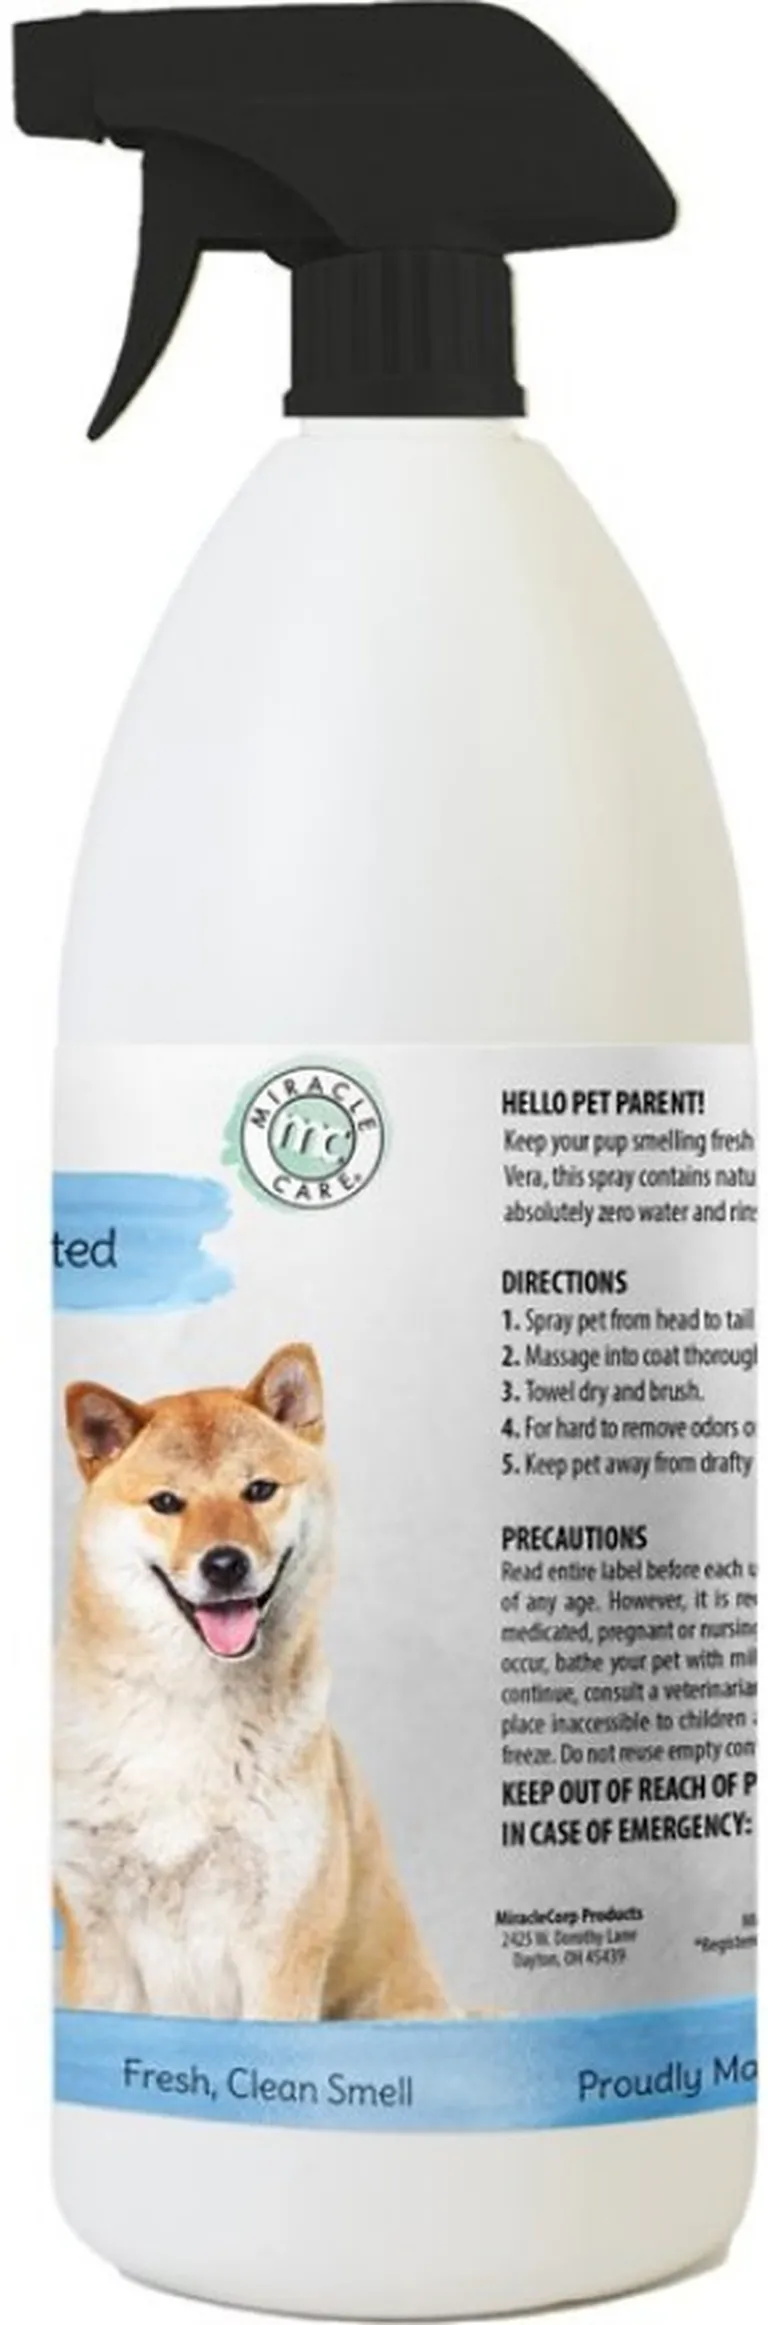 Miracle Care Waterless Bath Spray for Dogs and Cats Photo 2